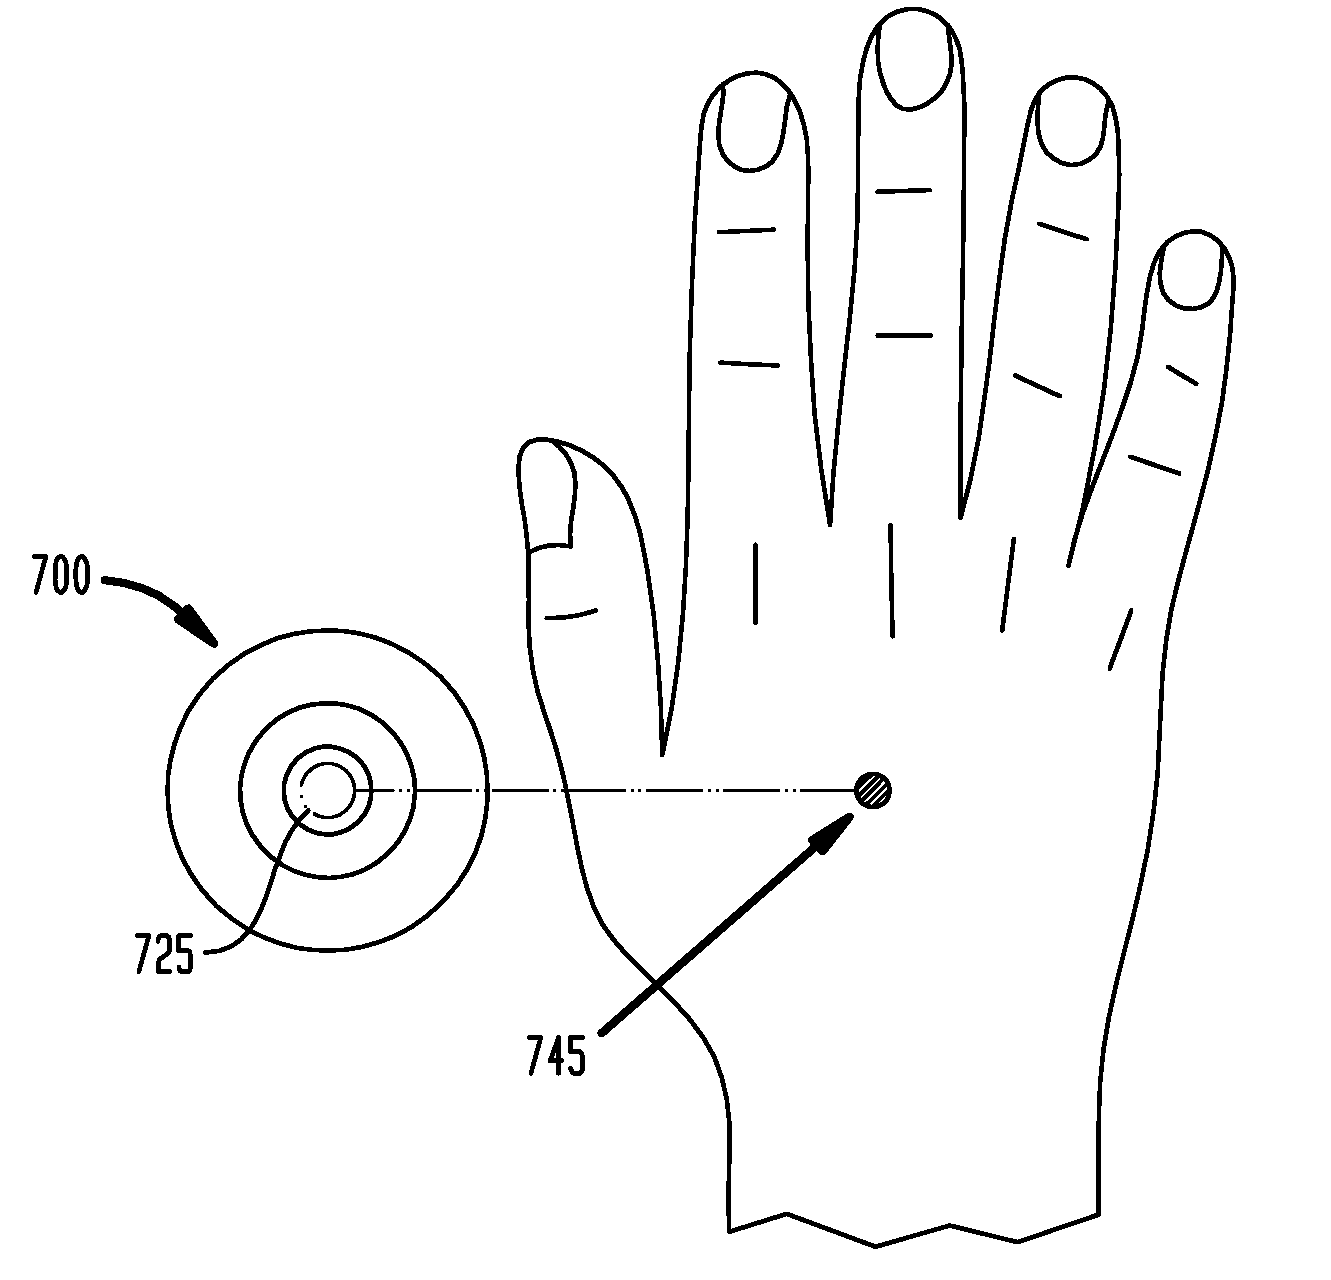 Self-locating, multiple application, and multiple location medical patch systems and methods therefor